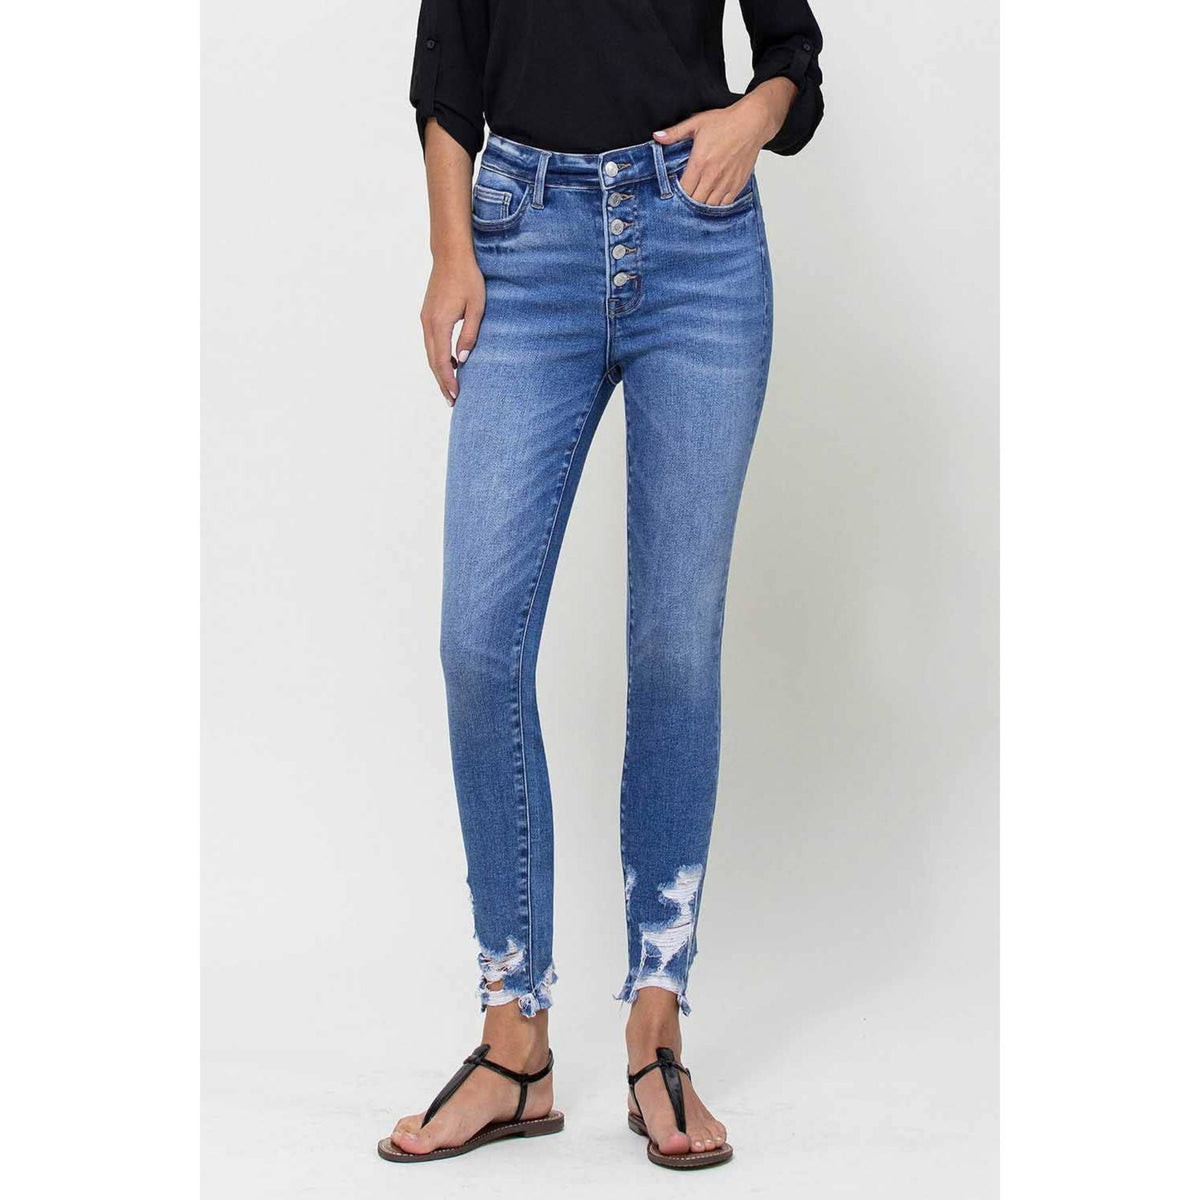 High rise buttoned dstressed bottom skinny jeans; womens clothing.